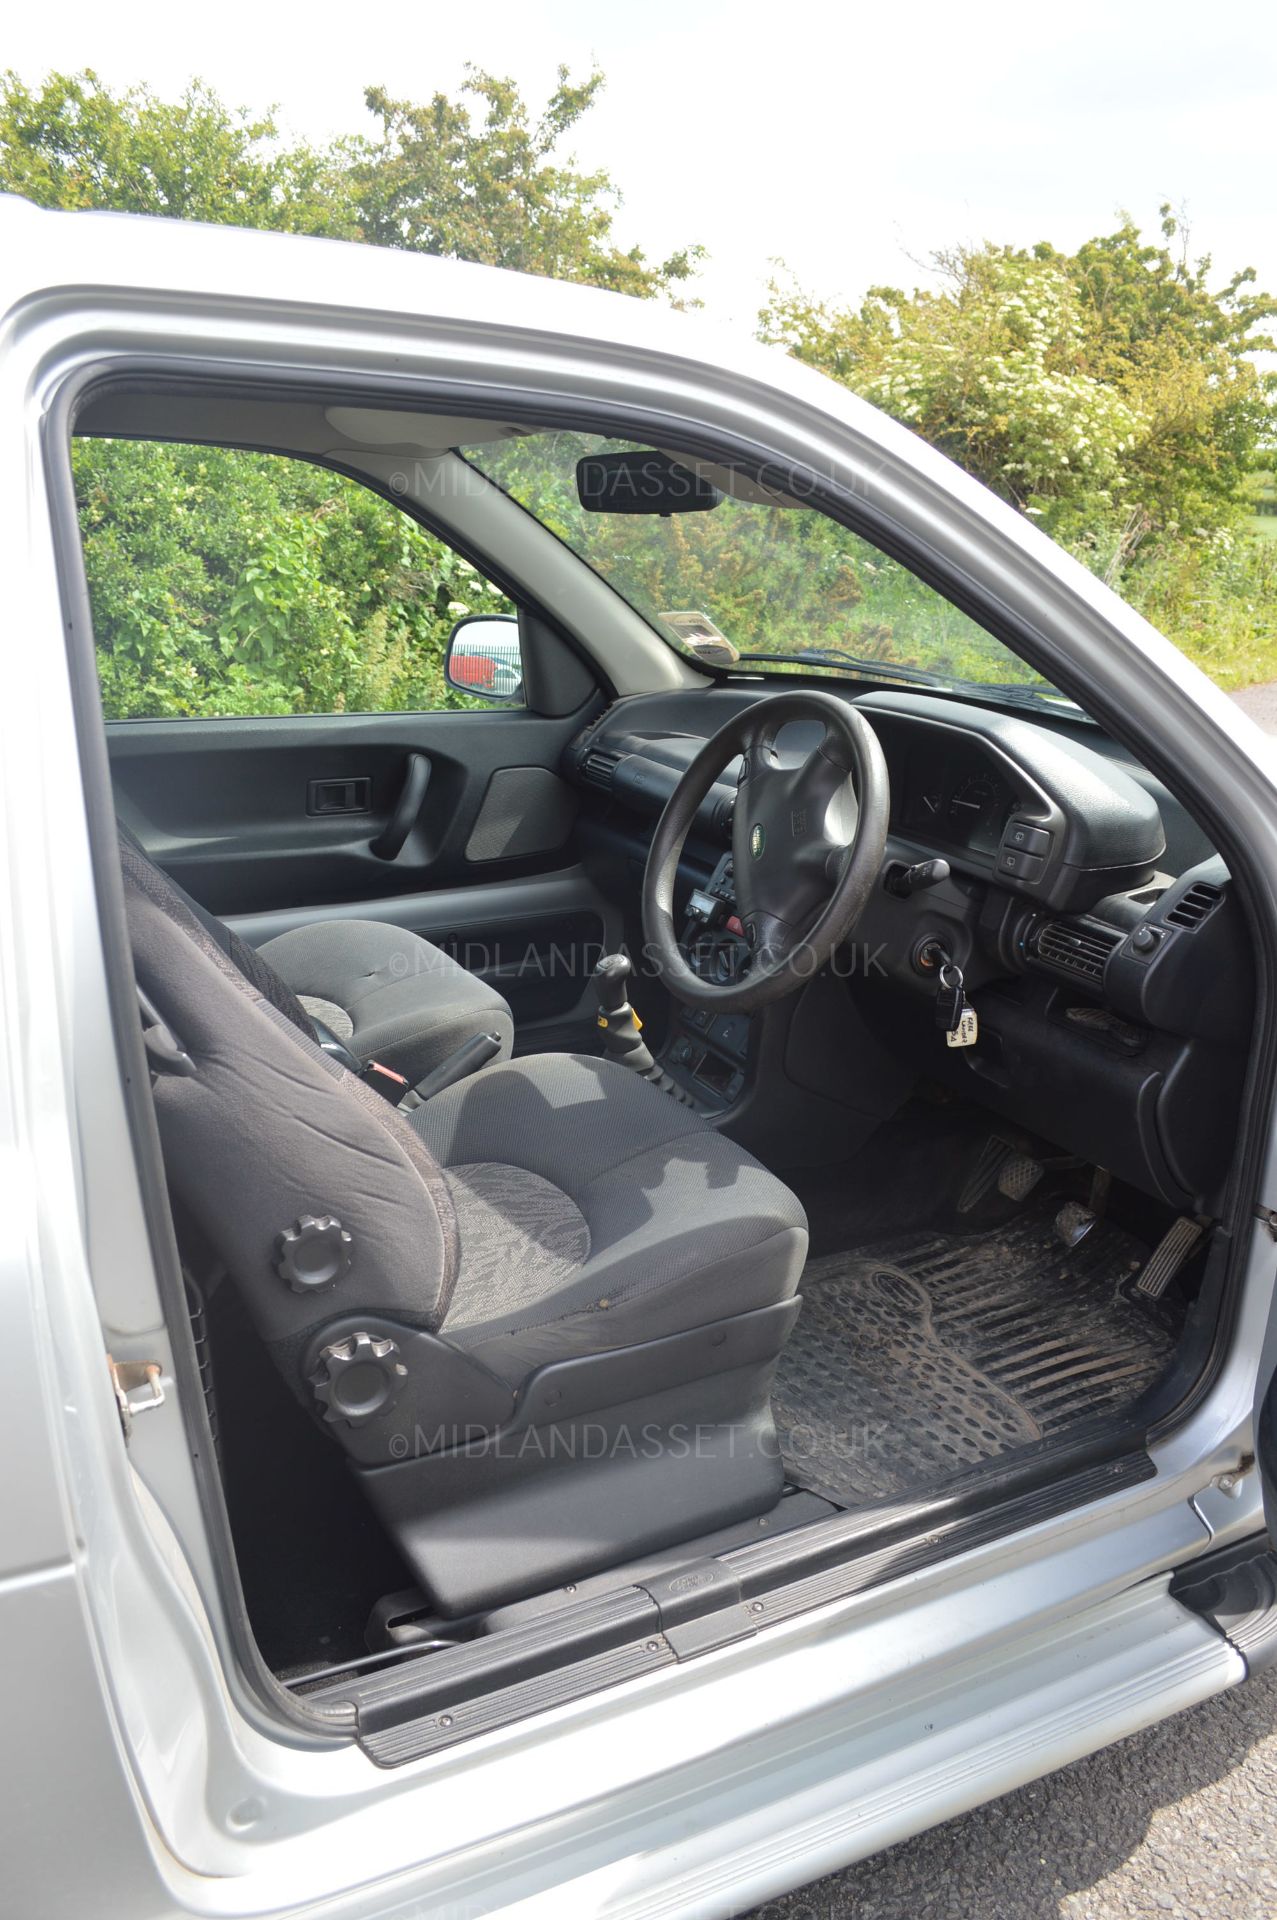 2003/03 REG LAND ROVER FREELANDER 3DR 2.0 TD4 SWB COMMERCIAL 4X4 SPECIAL VEHICLE - AIR CON *NO VAT* - Image 13 of 42